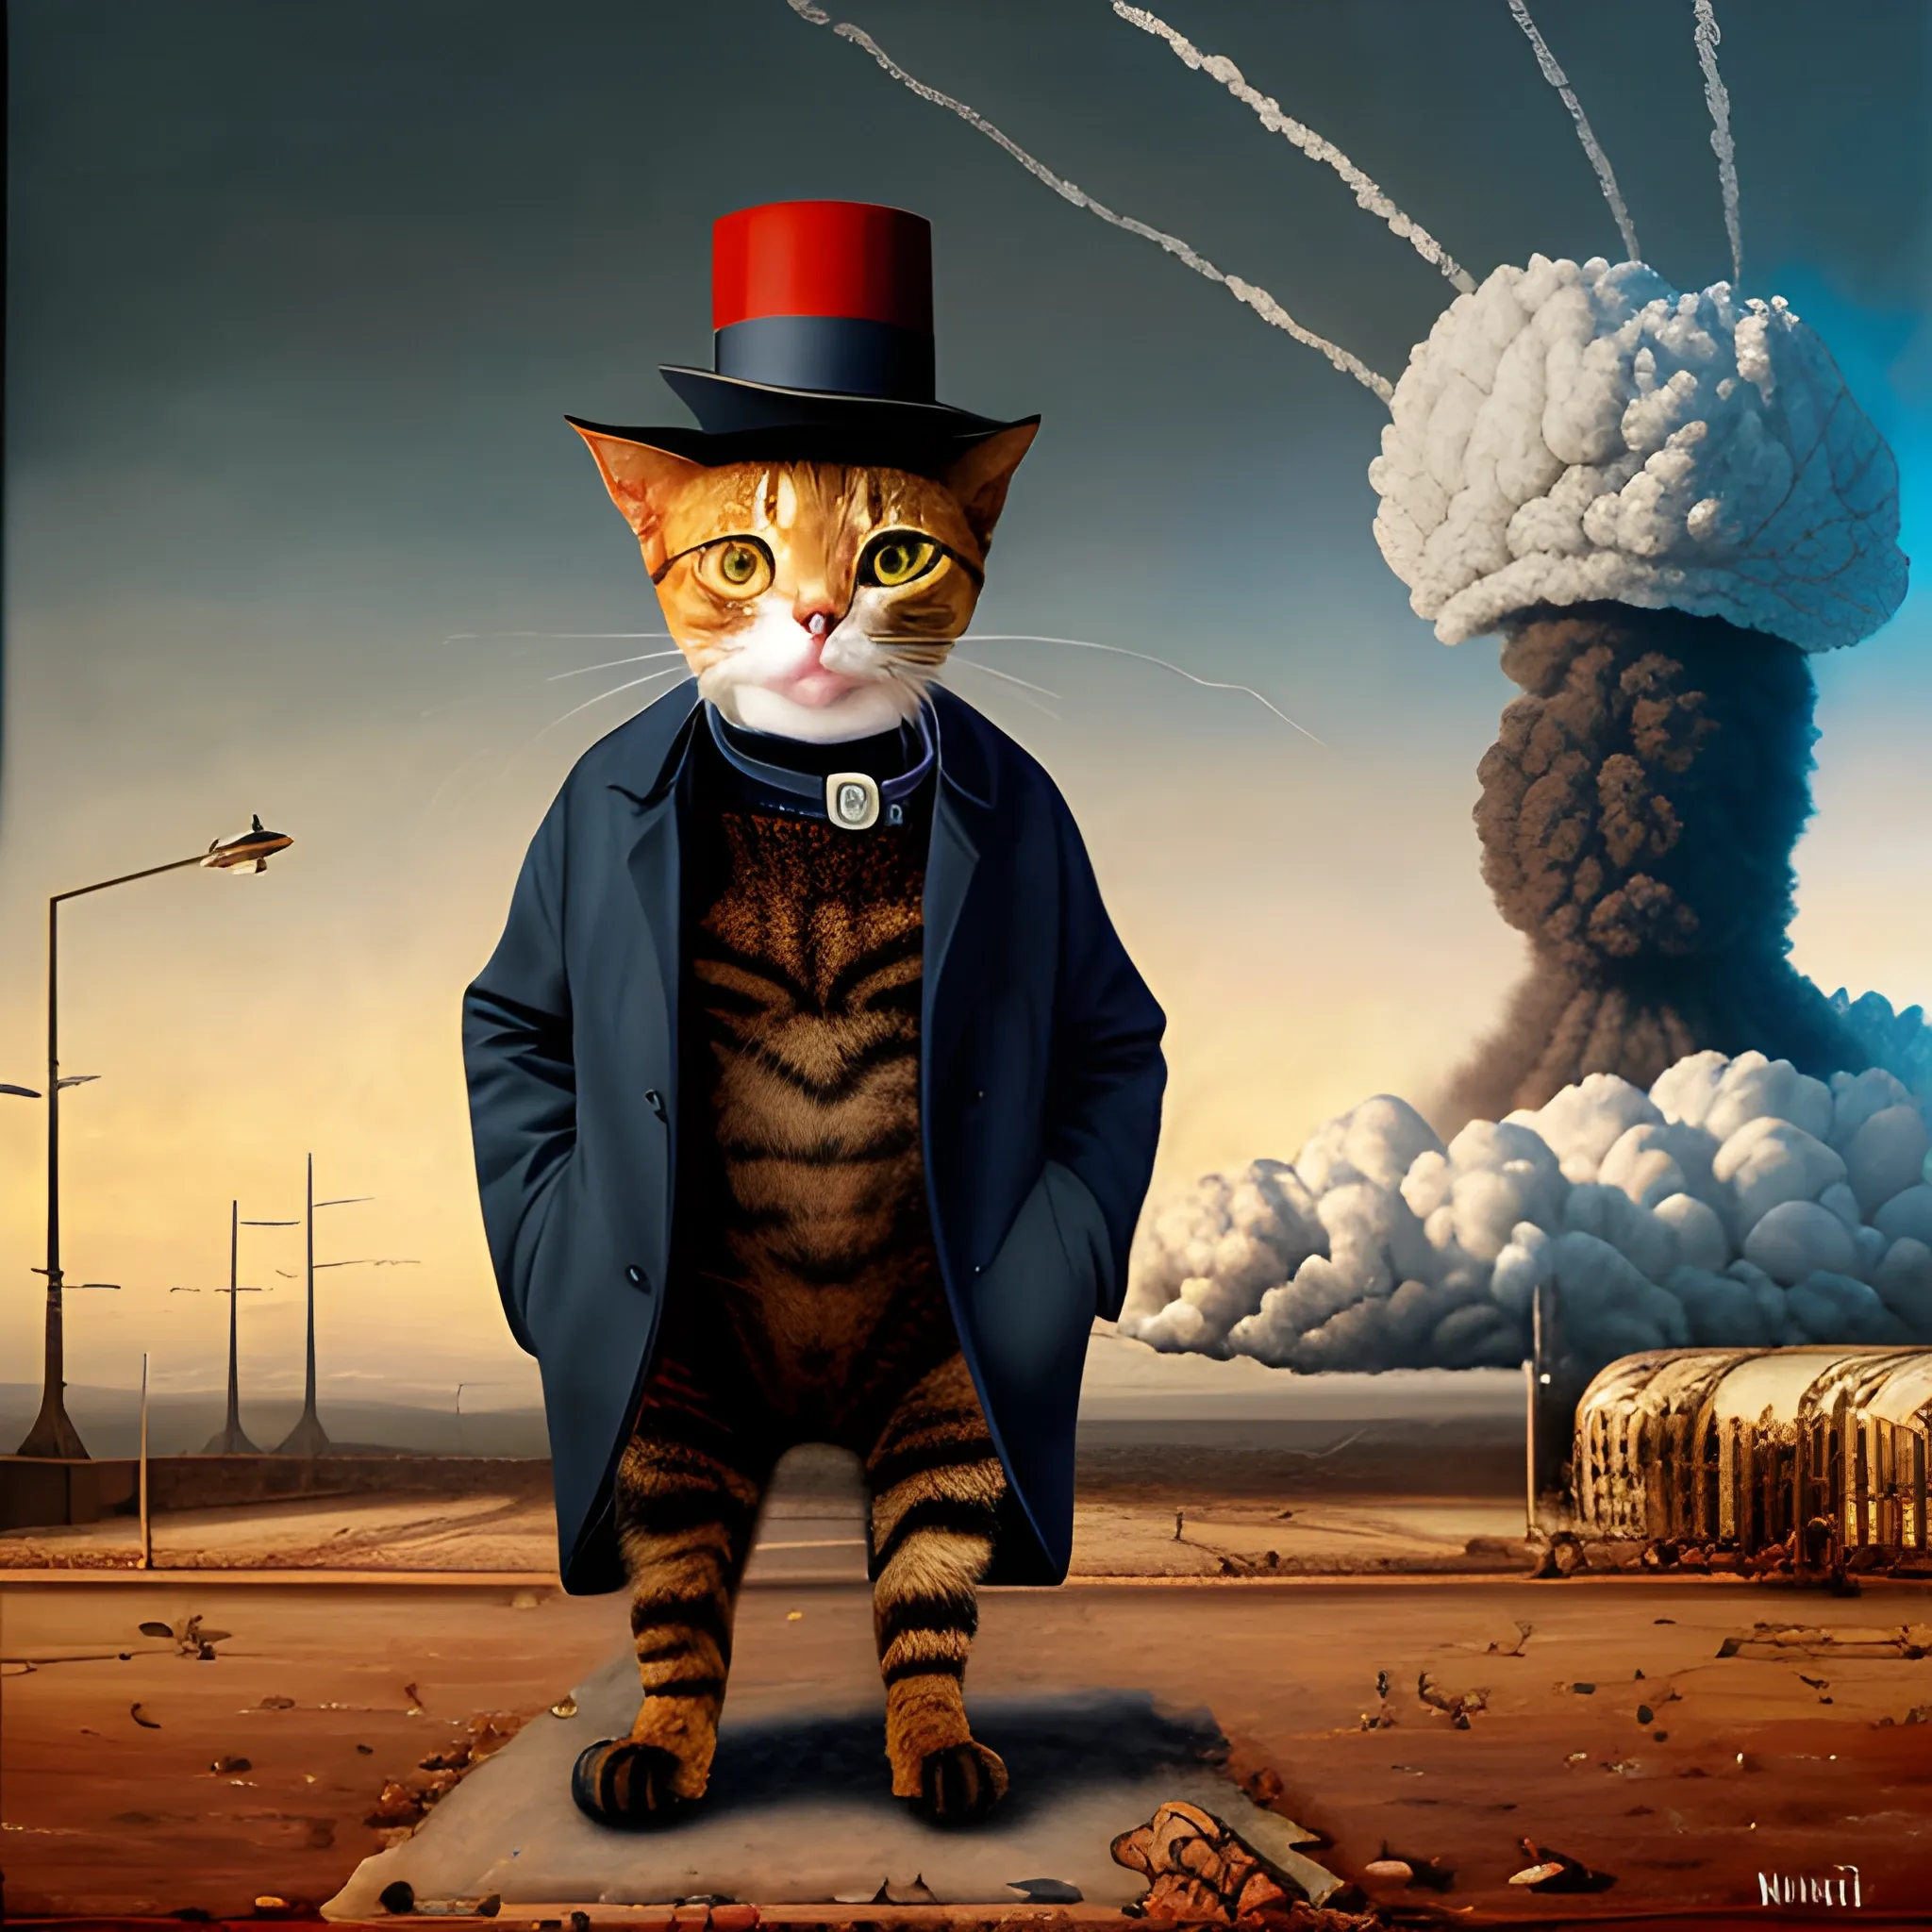 an humanoid cat whit a coat, a nuclear explotion in the background, the cat has a hat, realistic, cinematografic ,Oil Painting, the cat has a cigar